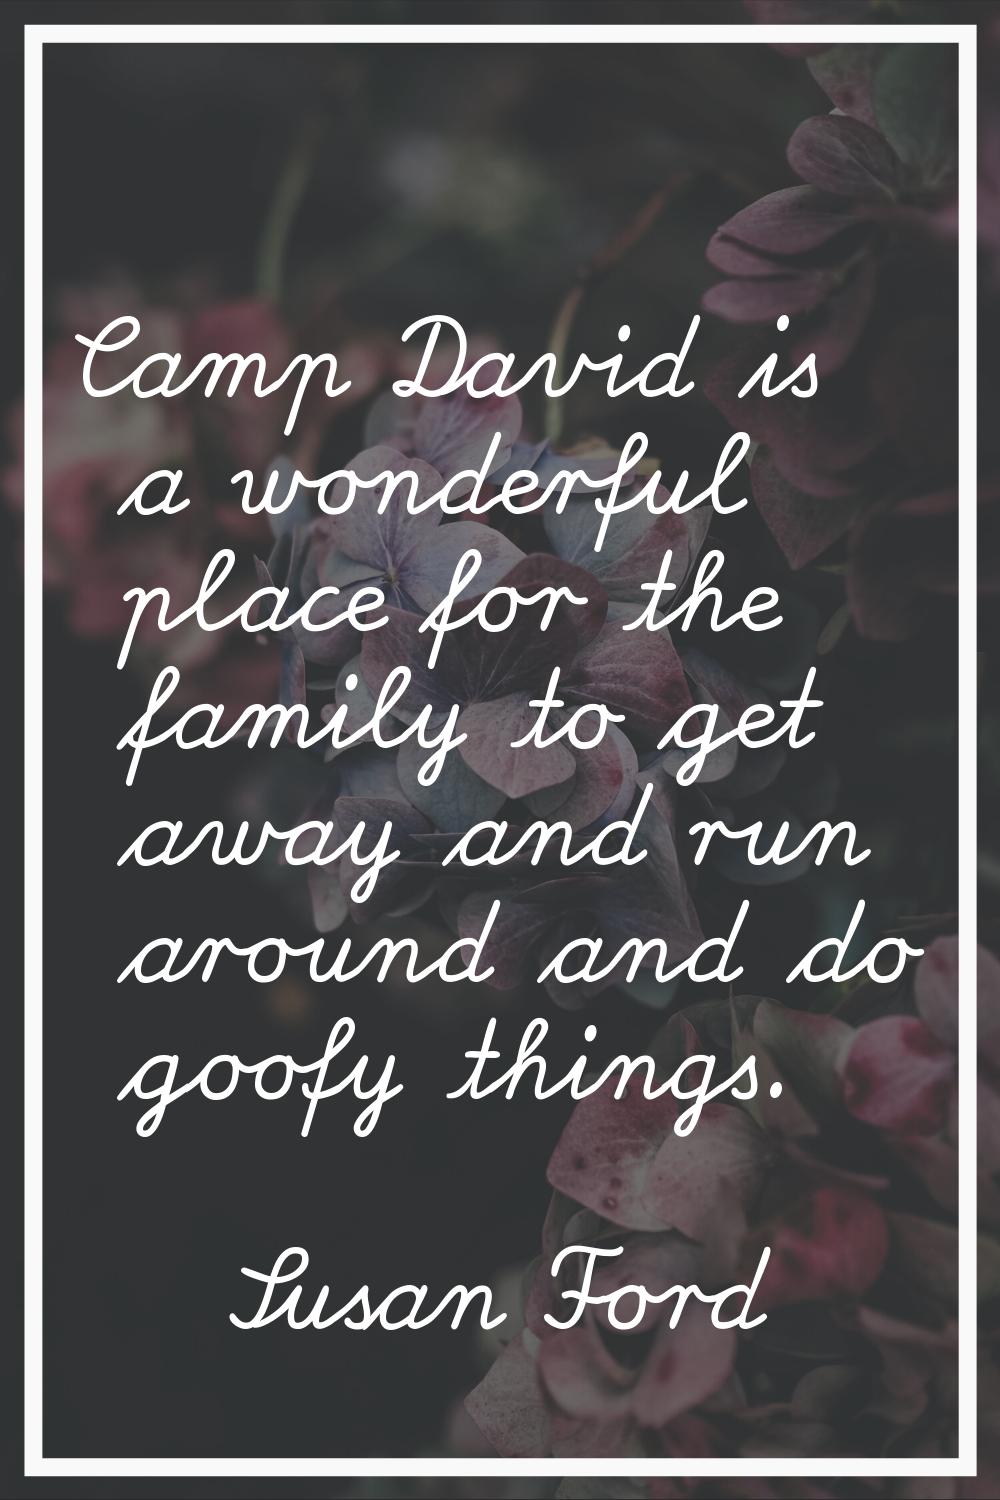 Camp David is a wonderful place for the family to get away and run around and do goofy things.